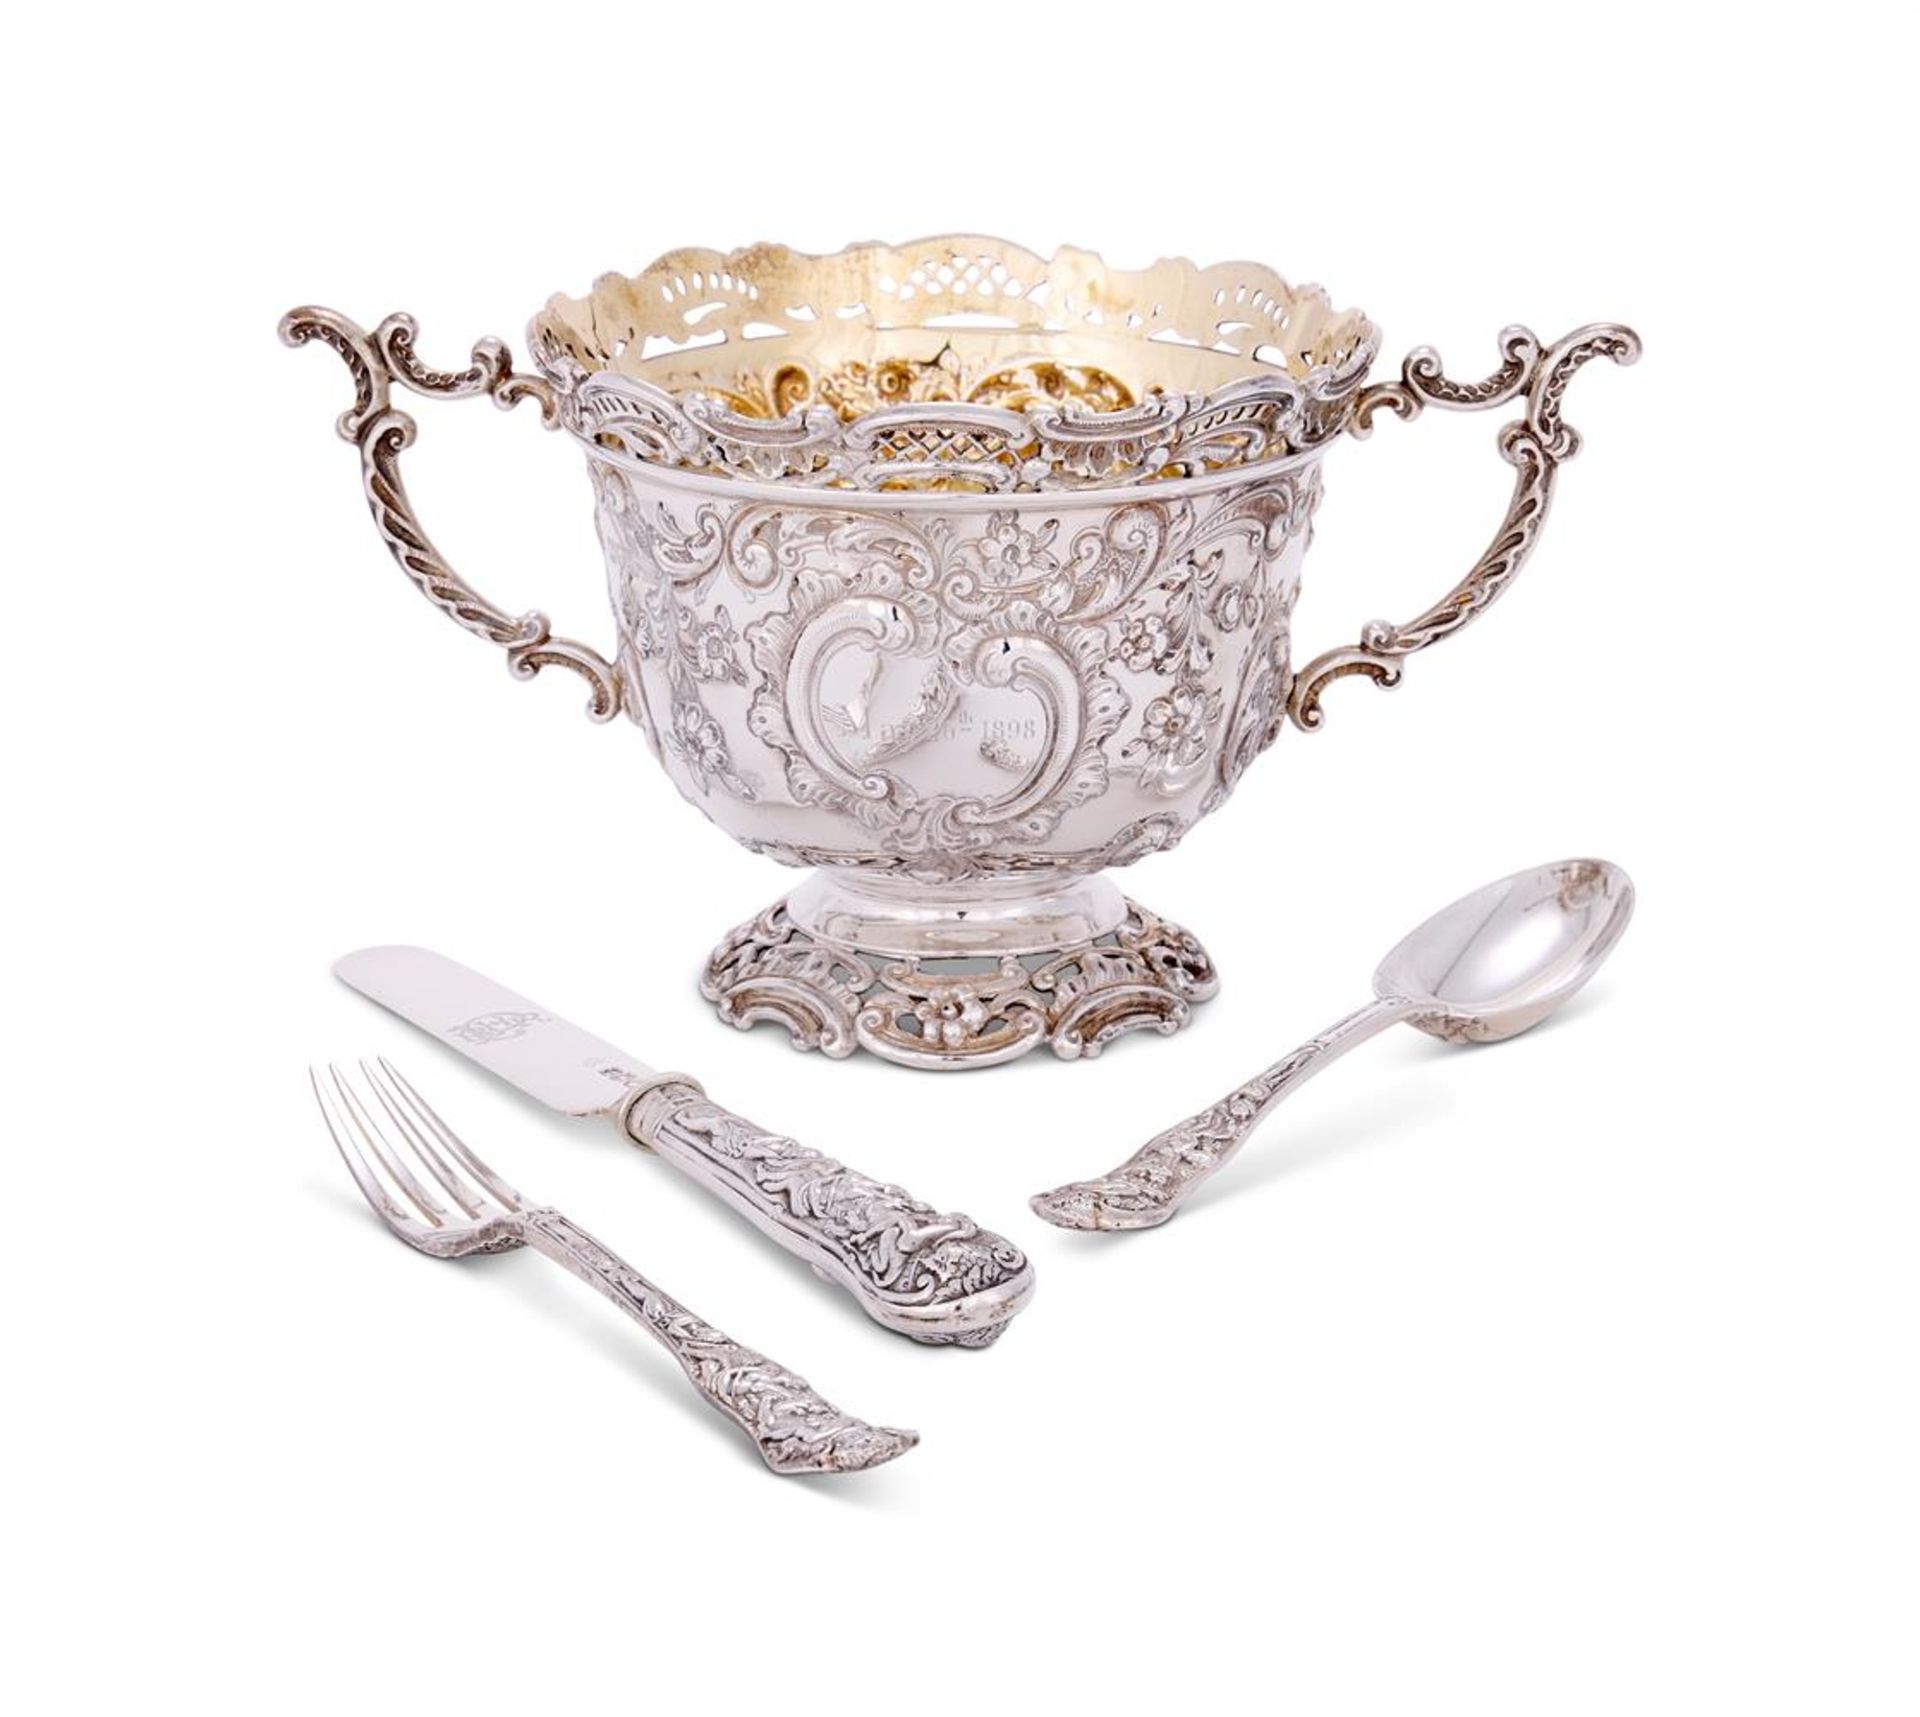 A CASED VICTORIAN CHRISTENING SILVER TWIN HANDLED BOWL, KNIFE, FORK AND SPOON - Image 3 of 3